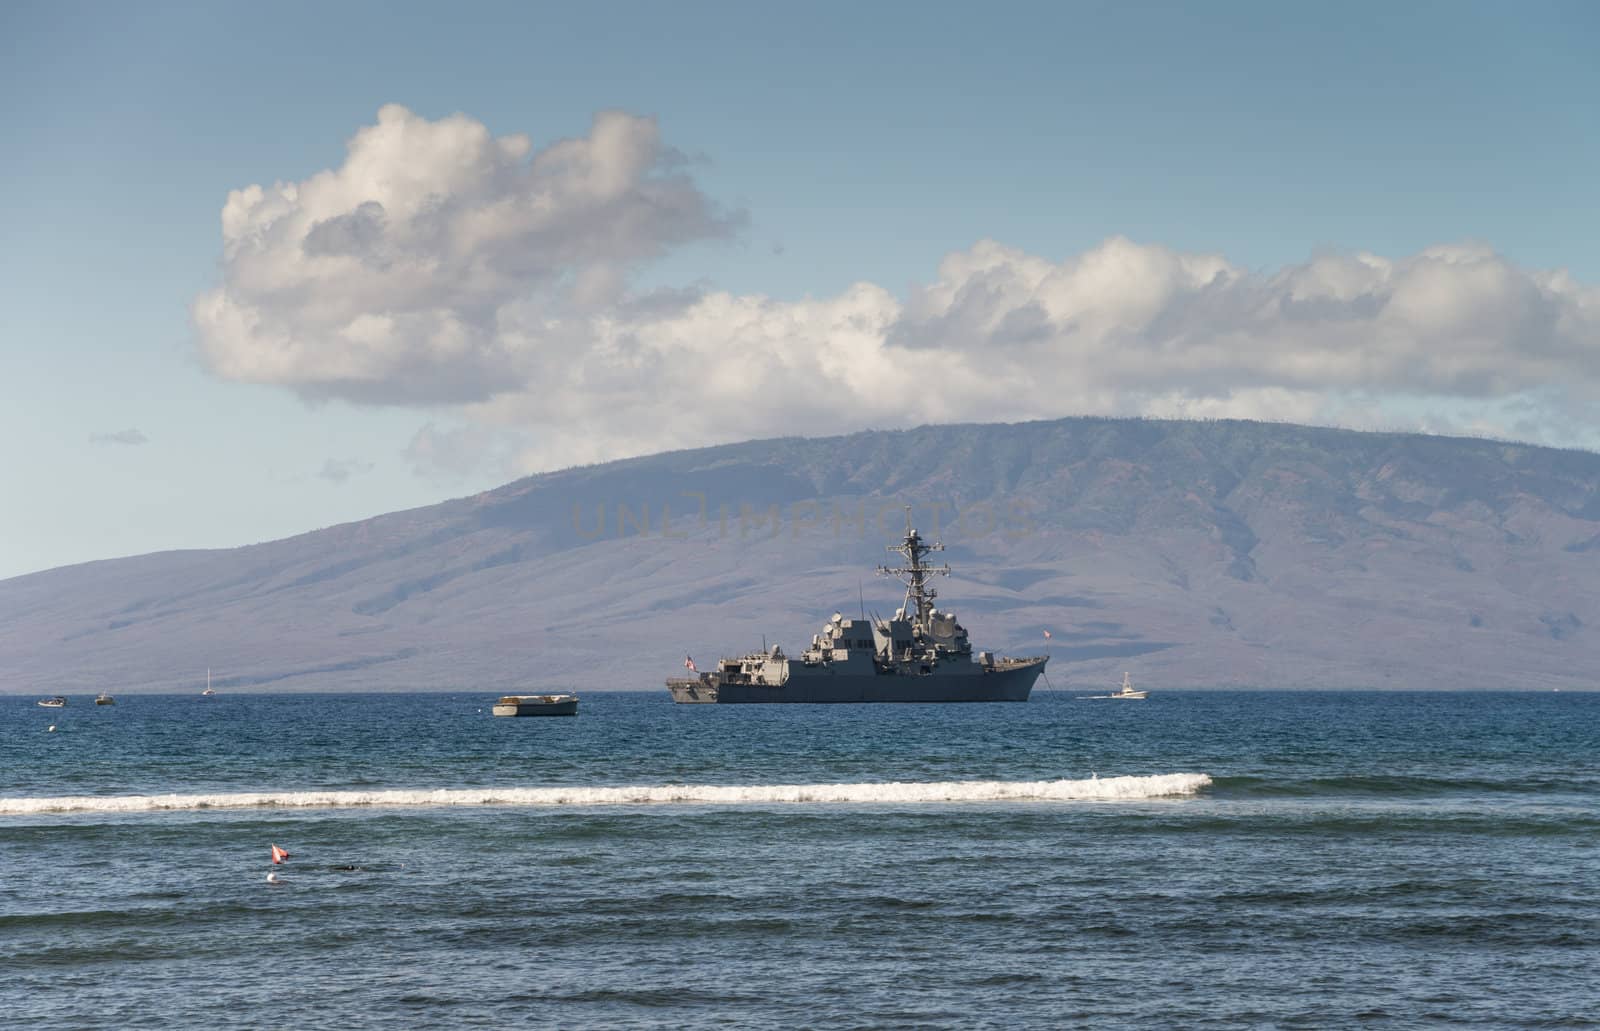 United States Navy Ship anchored off the coast of Maui, Hawaii.  The island of Lanai in background